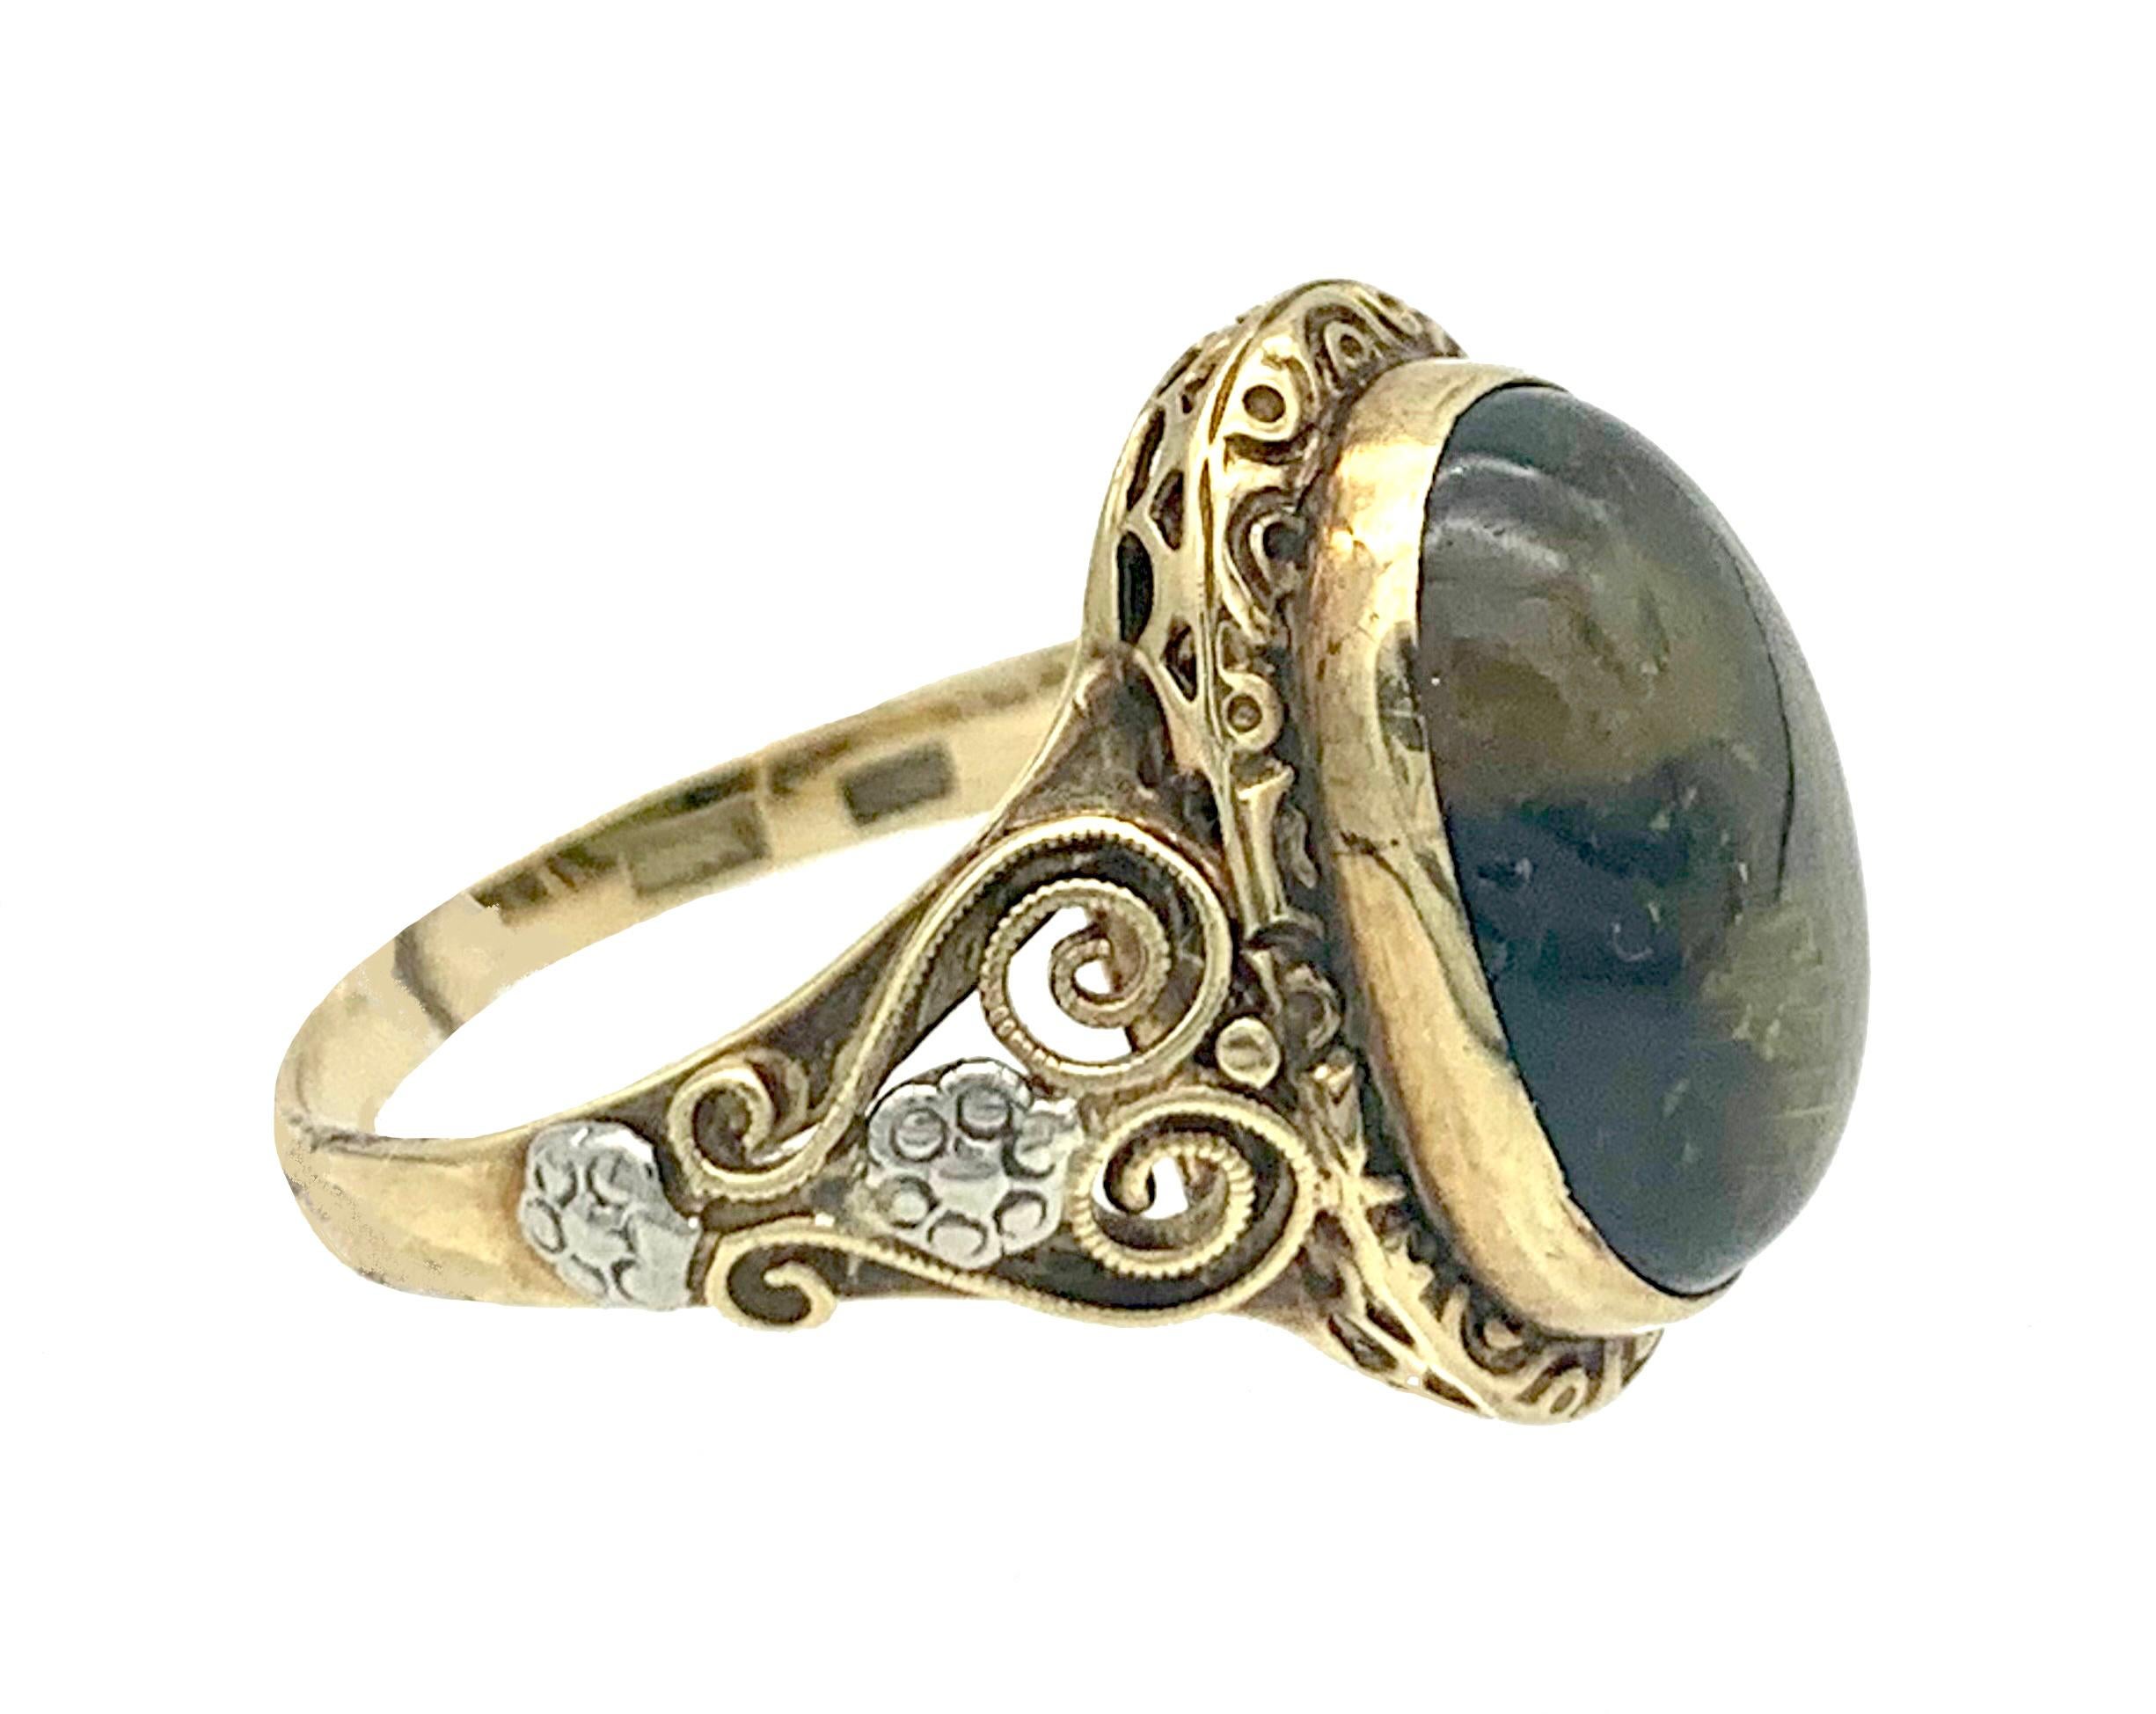 This ring was created towards the end of the 19th century out of 14K gold and platinum. This unusual Art Nouveau jewel is set with a green fluorite cabochon in a gold mount within an outer ornamental surround decorated with half bull eyes. The sides